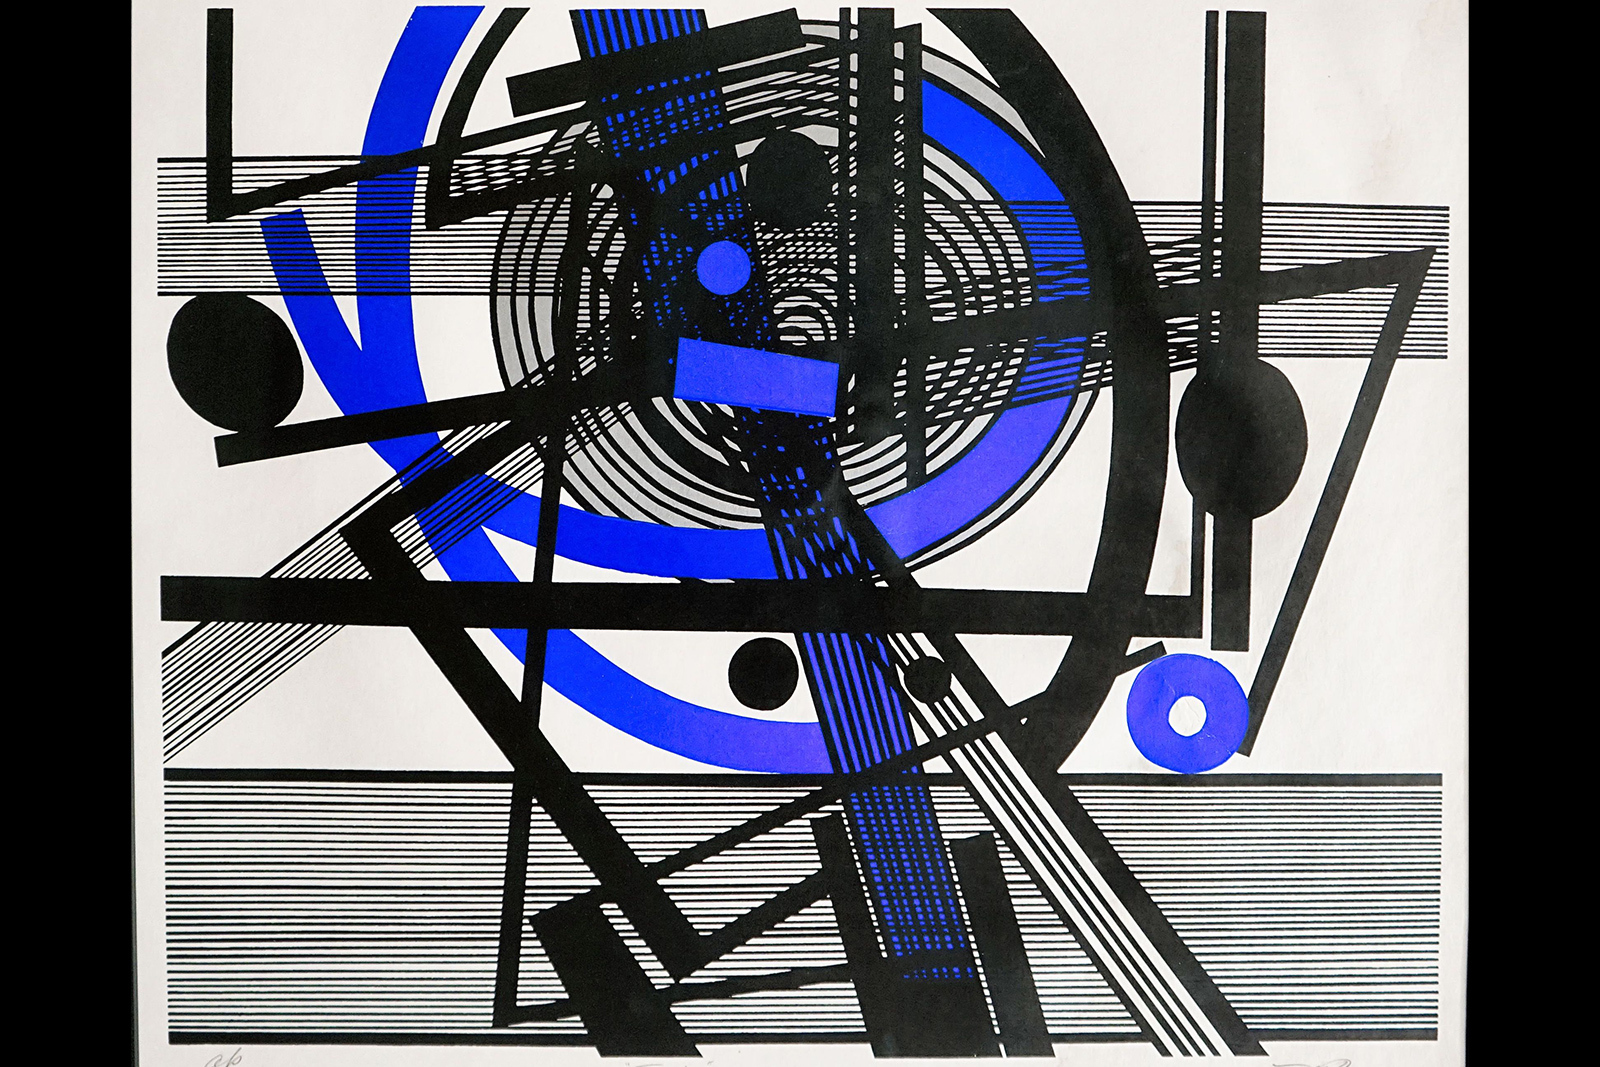 Mavis Pusey work Eric a print against white paper with several thin black line intersecting and blue overlaid highlights